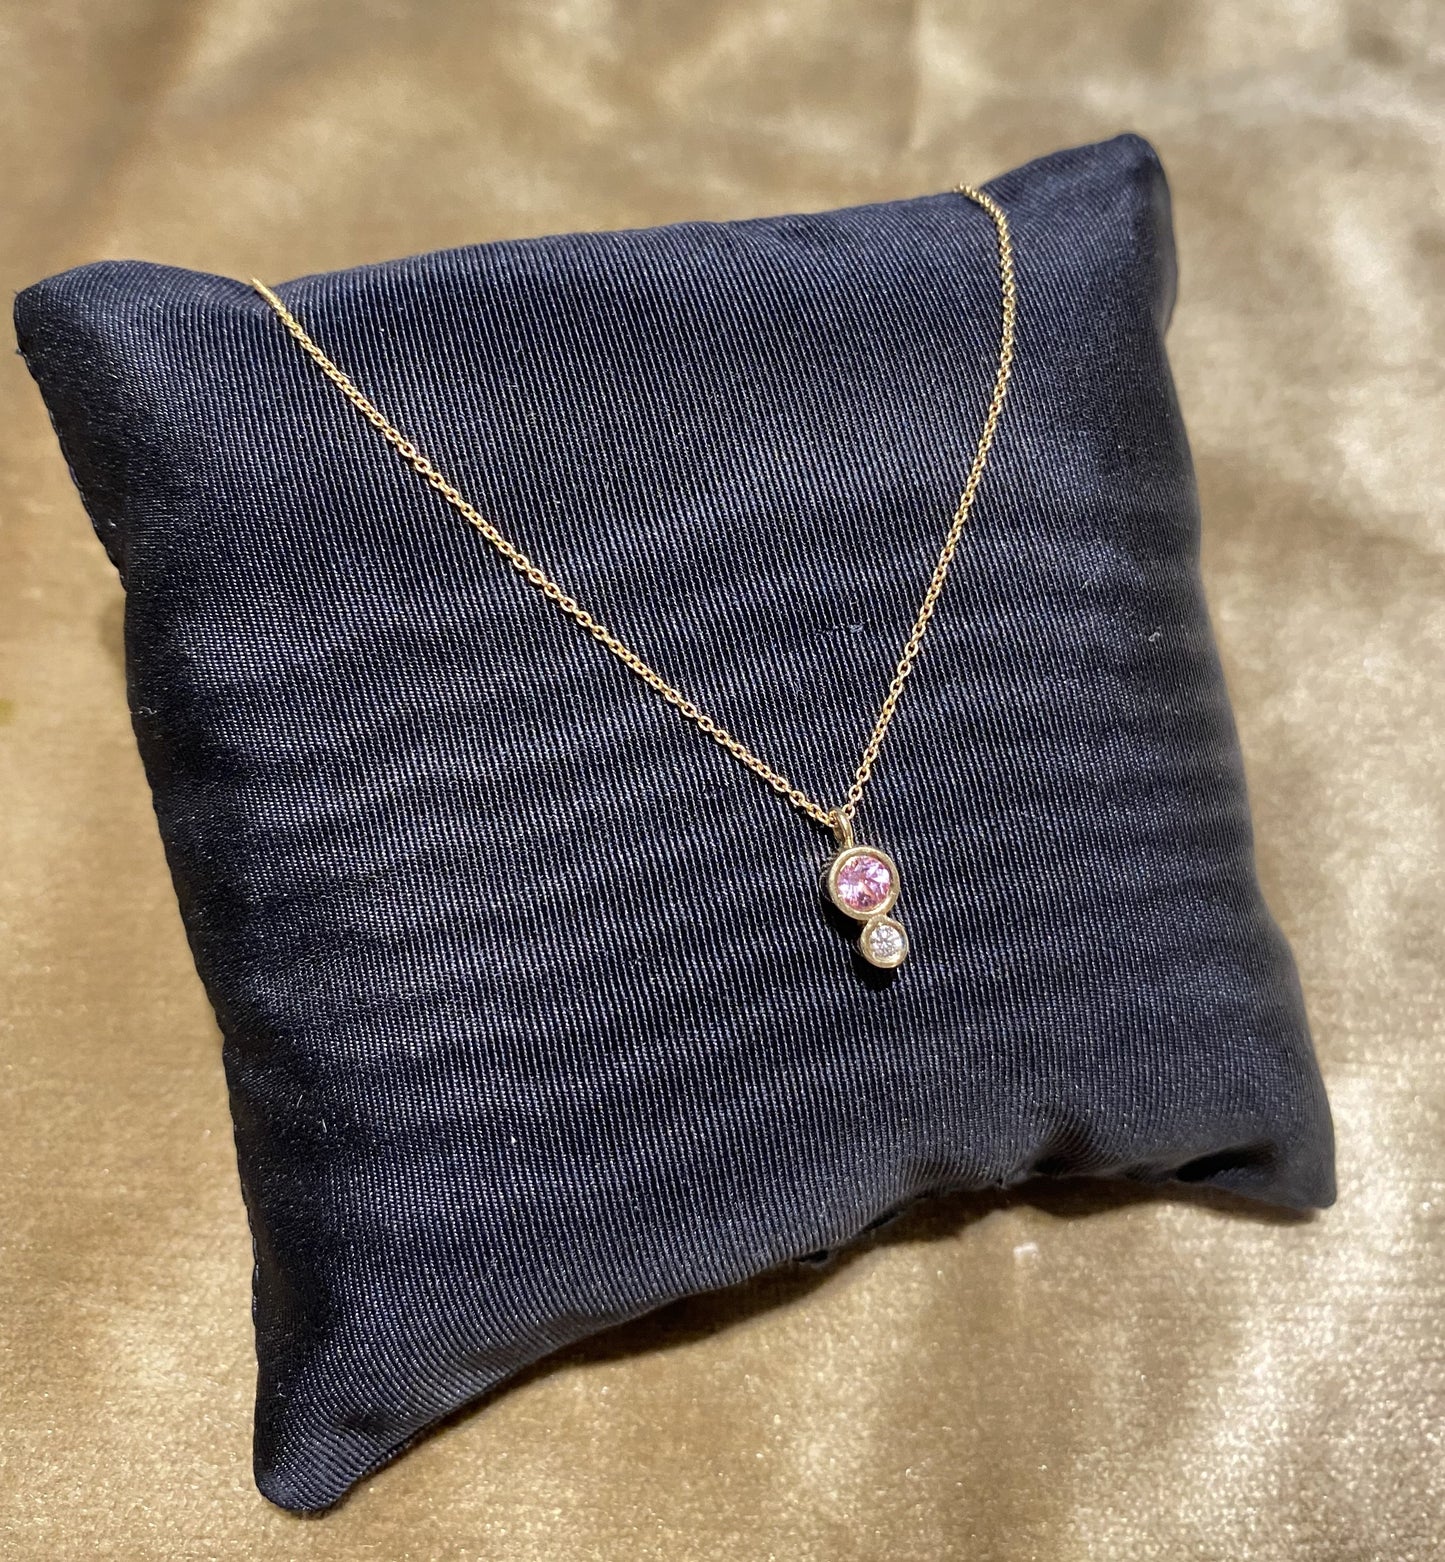 Classic Large Small Pink Necklace.